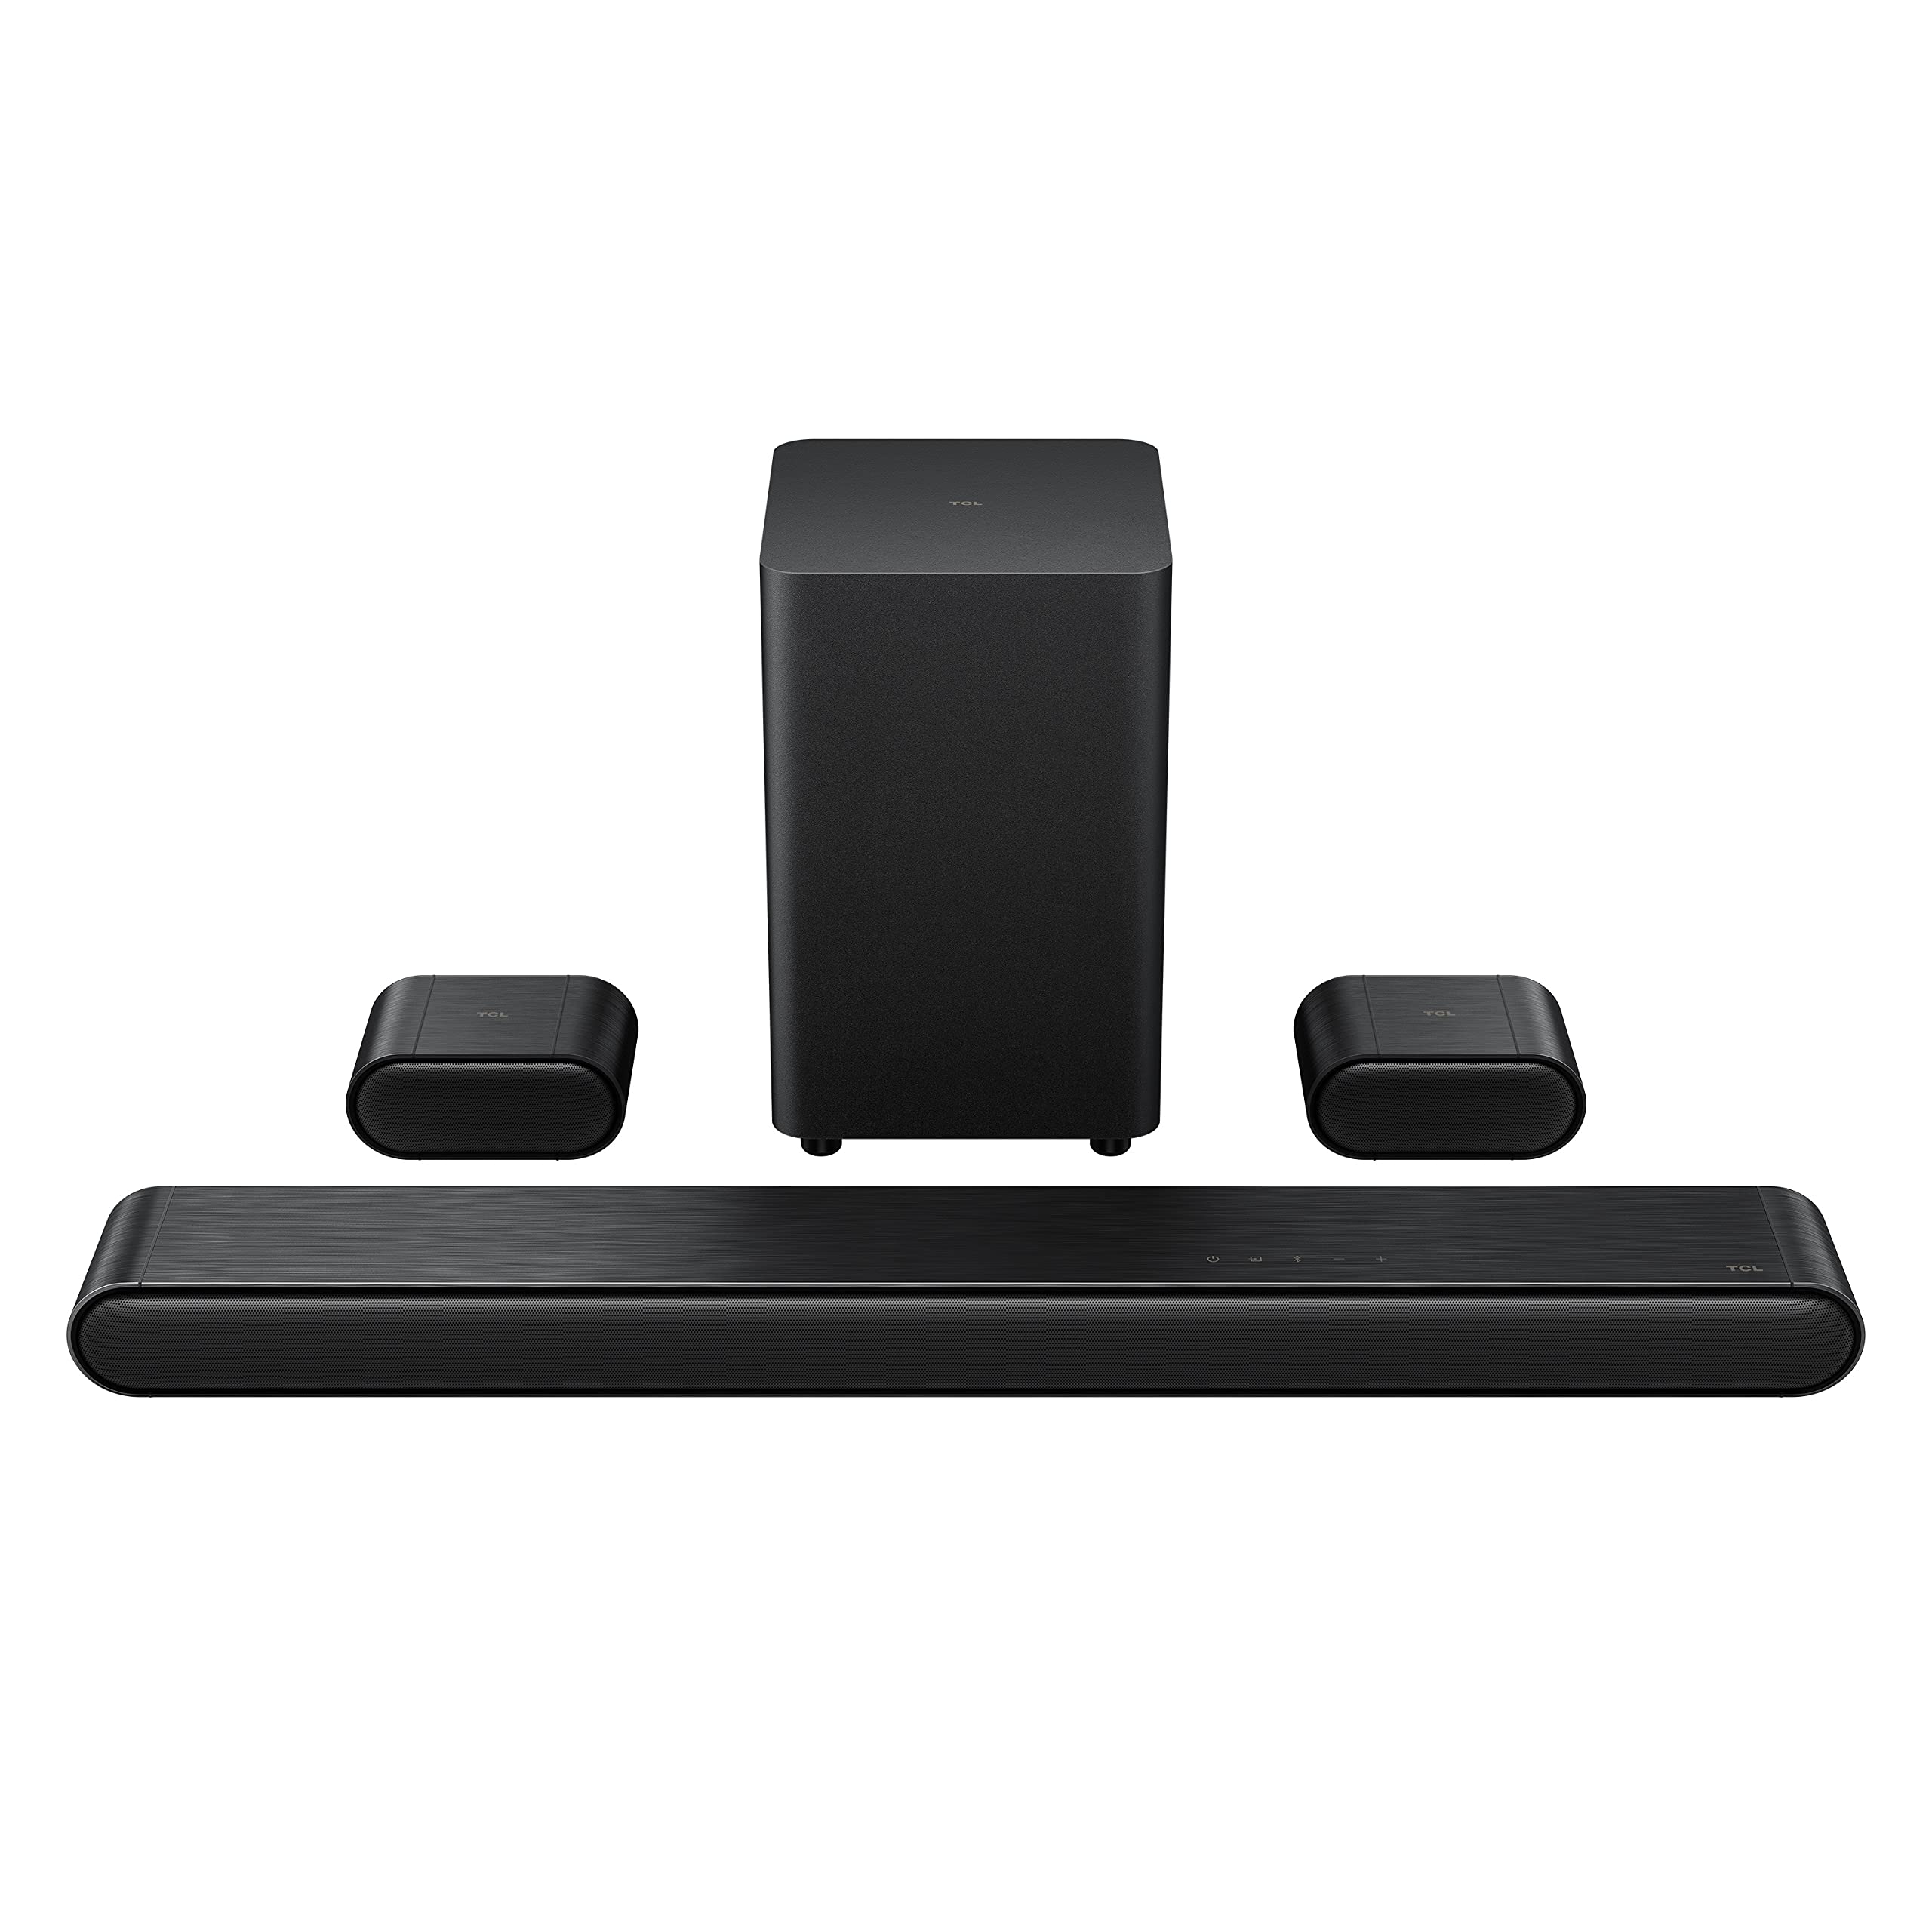 TCL 5.1ch Sound Bar with Wireless Subwoofer (S4510, 2023 Model), Built-in Center Channel, 2 Rear Surround Sound Speakers, Dolby Audio, DTS Virtual:X, Bluetooth, Wall Mount/HDMI Cable Included,Black